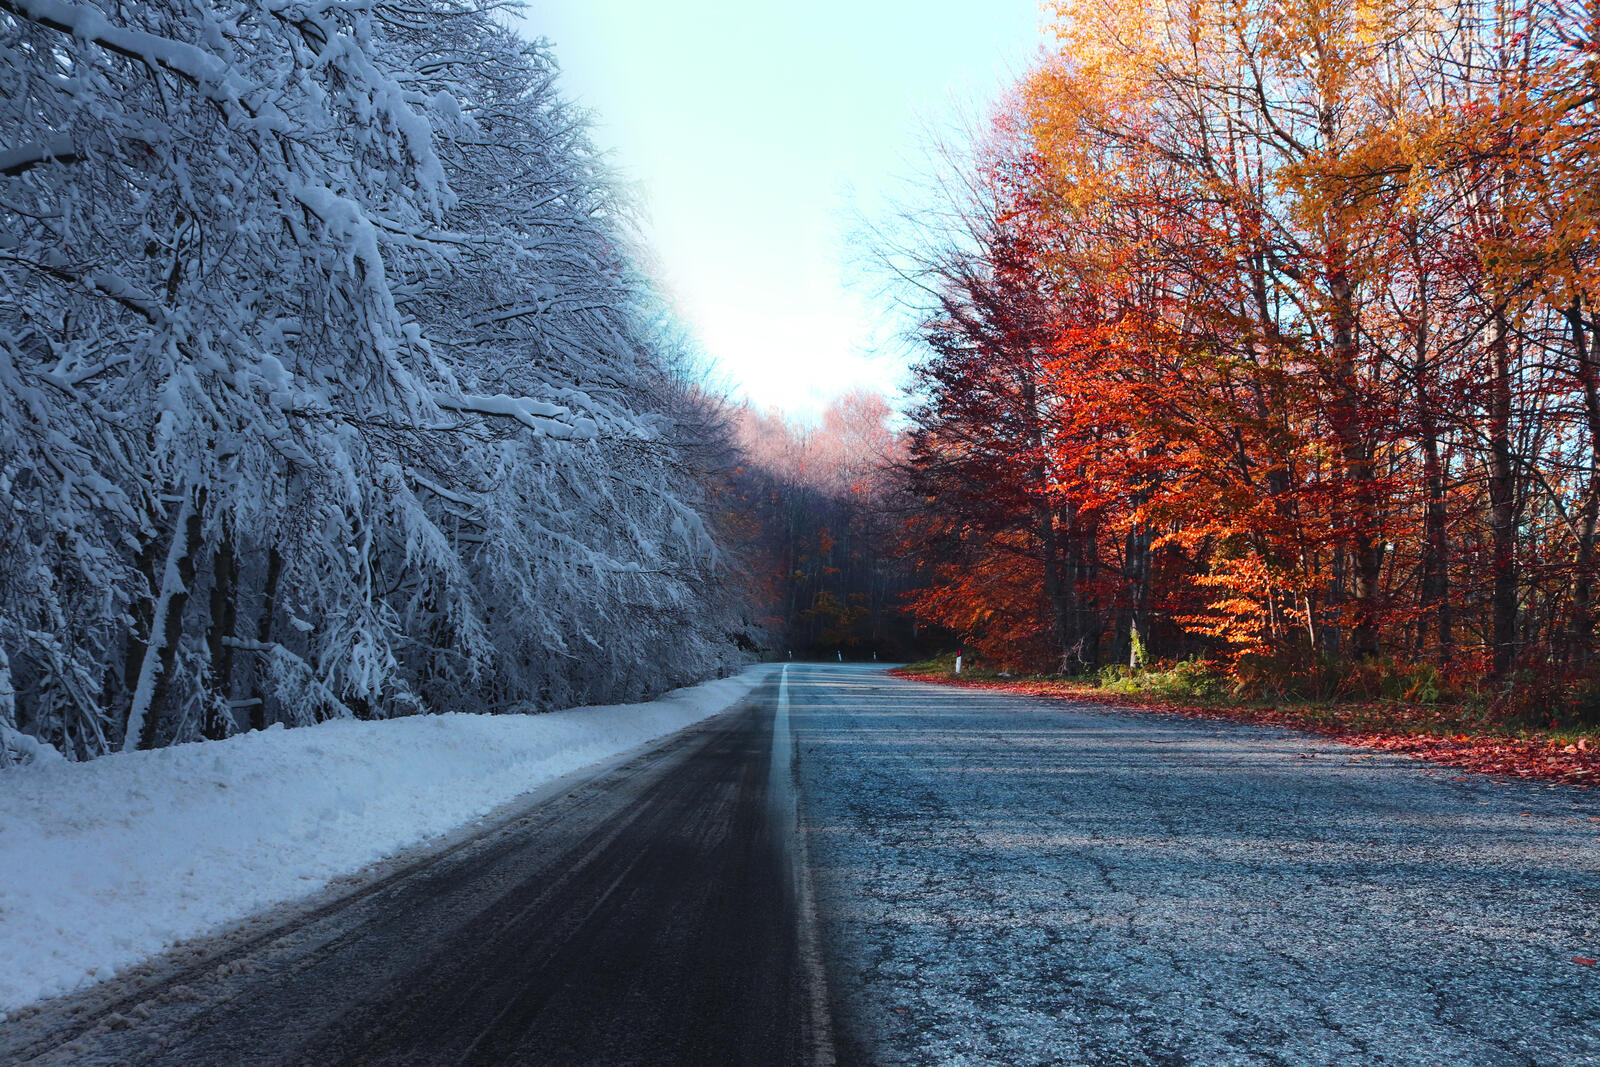 Free photo A snapshot of the road with the seasons, winter and fall